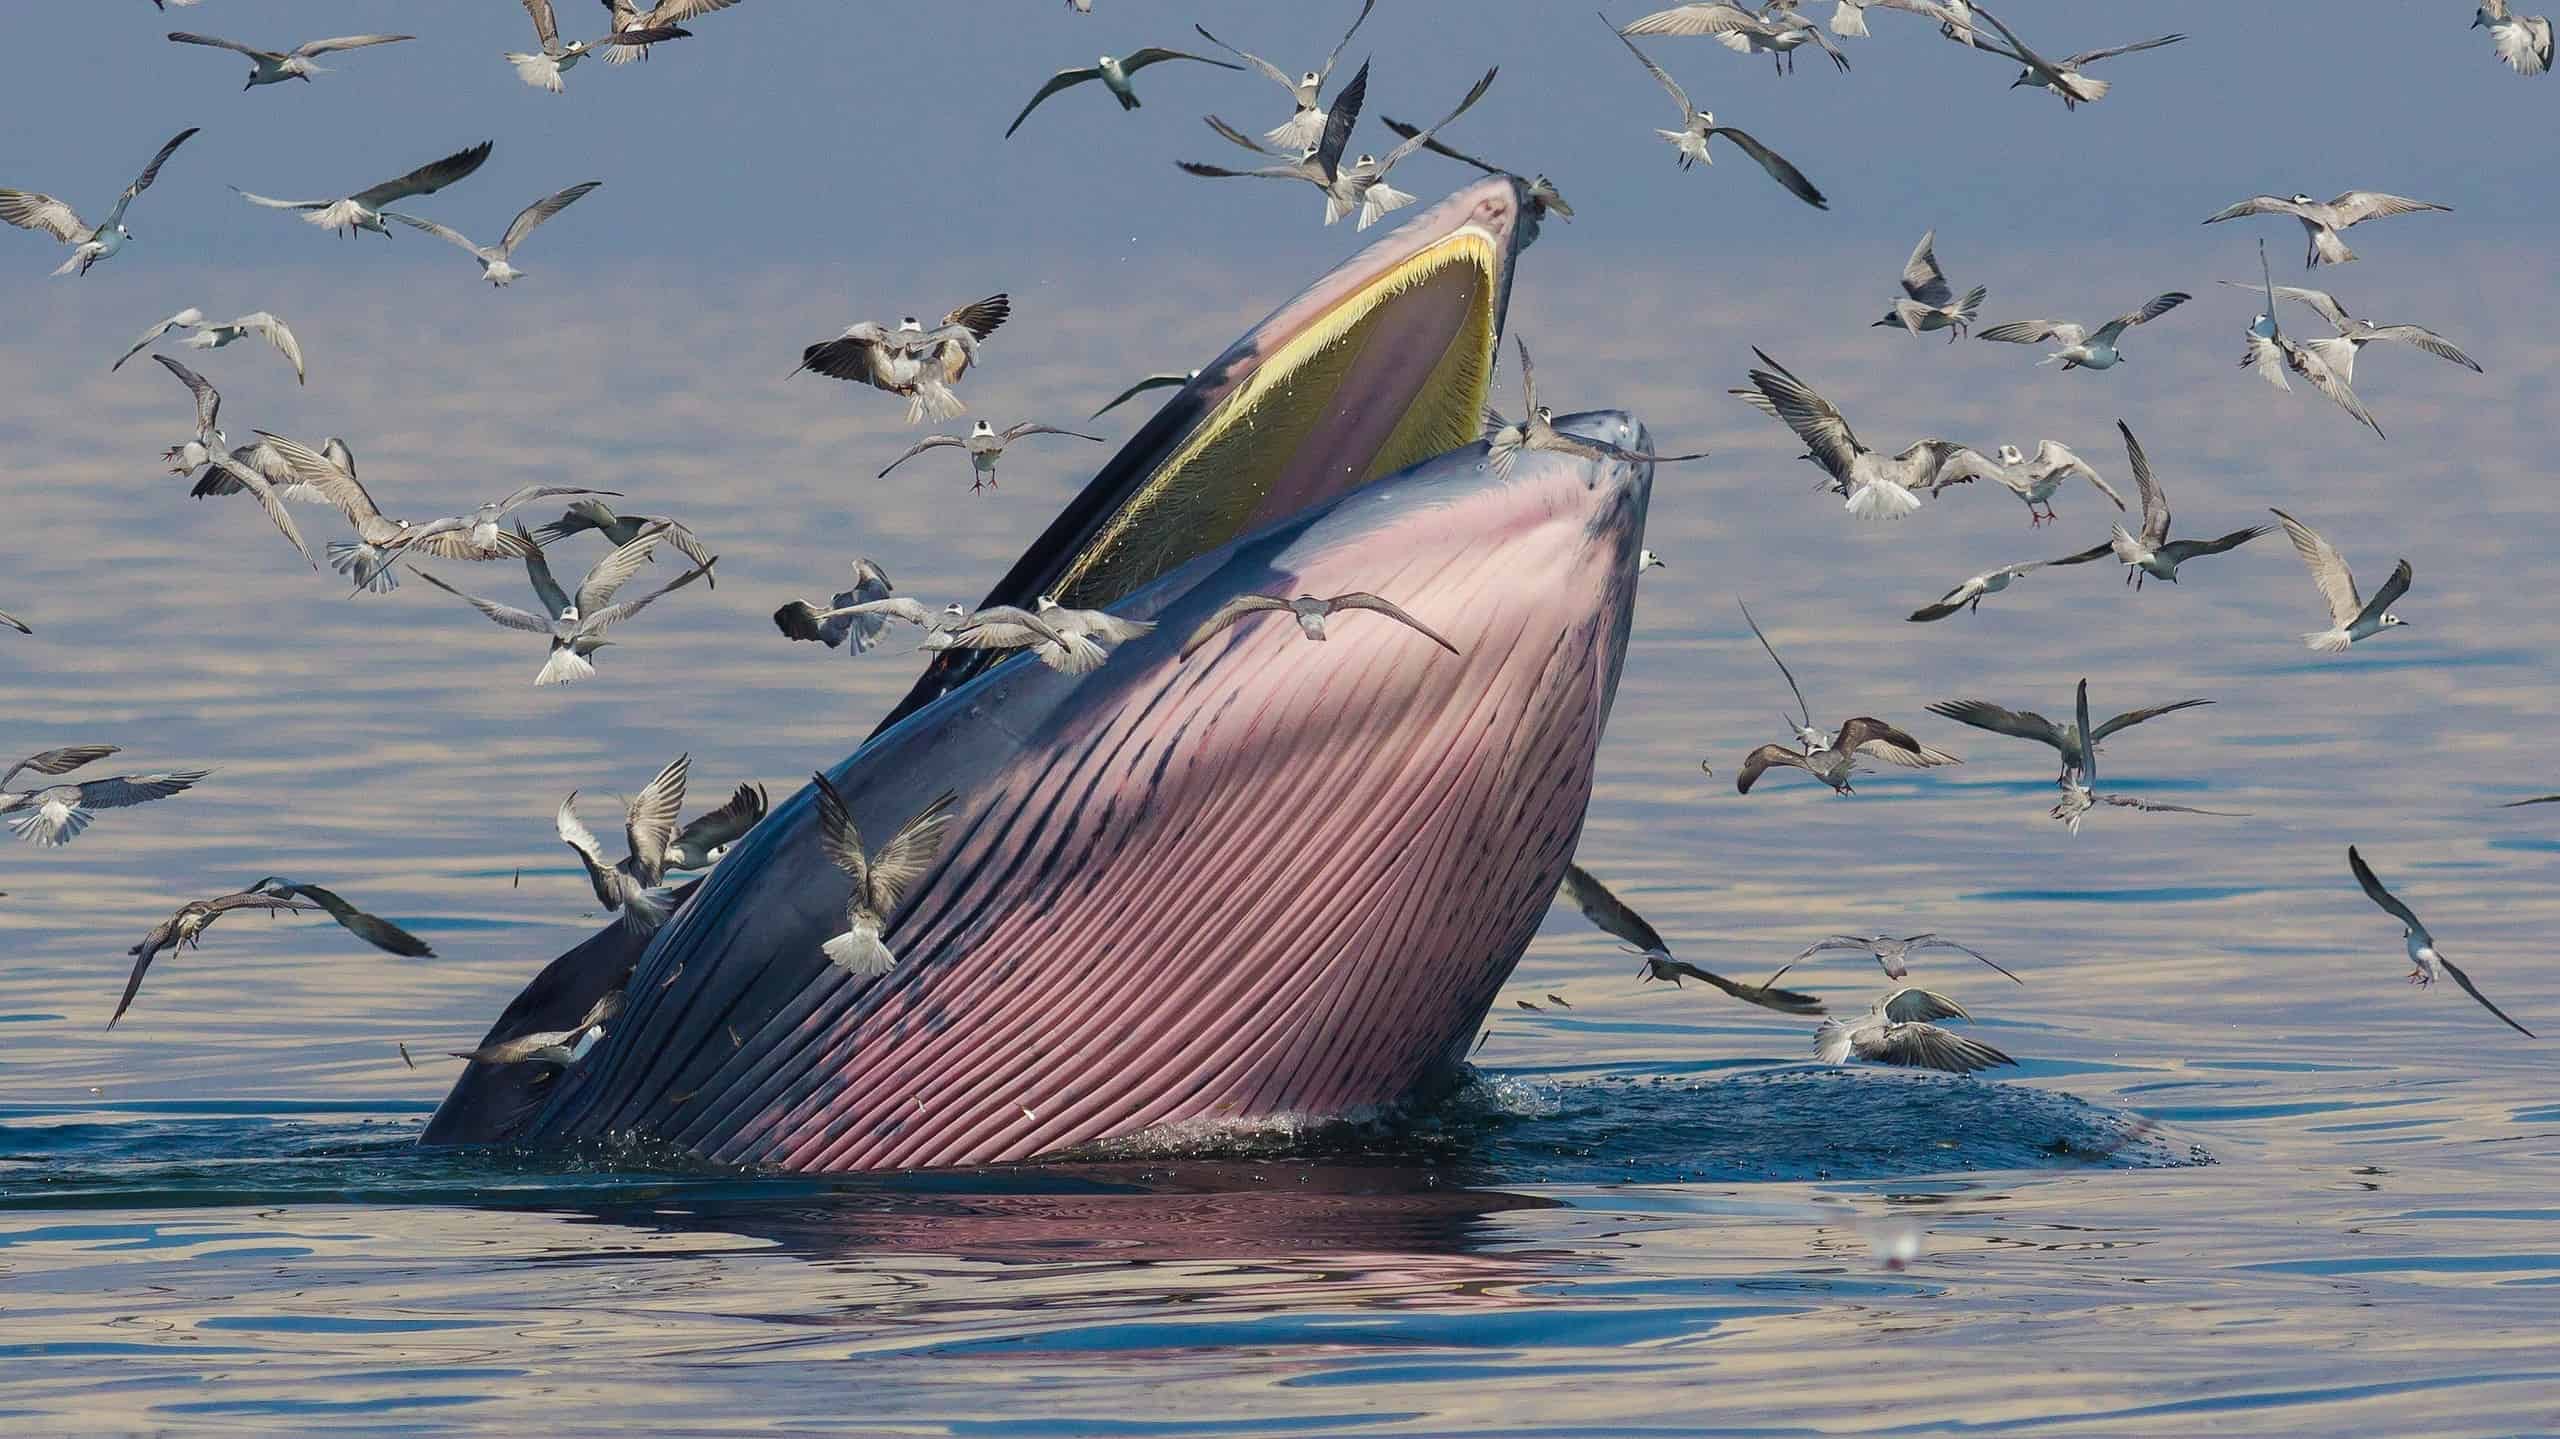 A Bryde's whale catching dinner at sunset, surrounded by birds